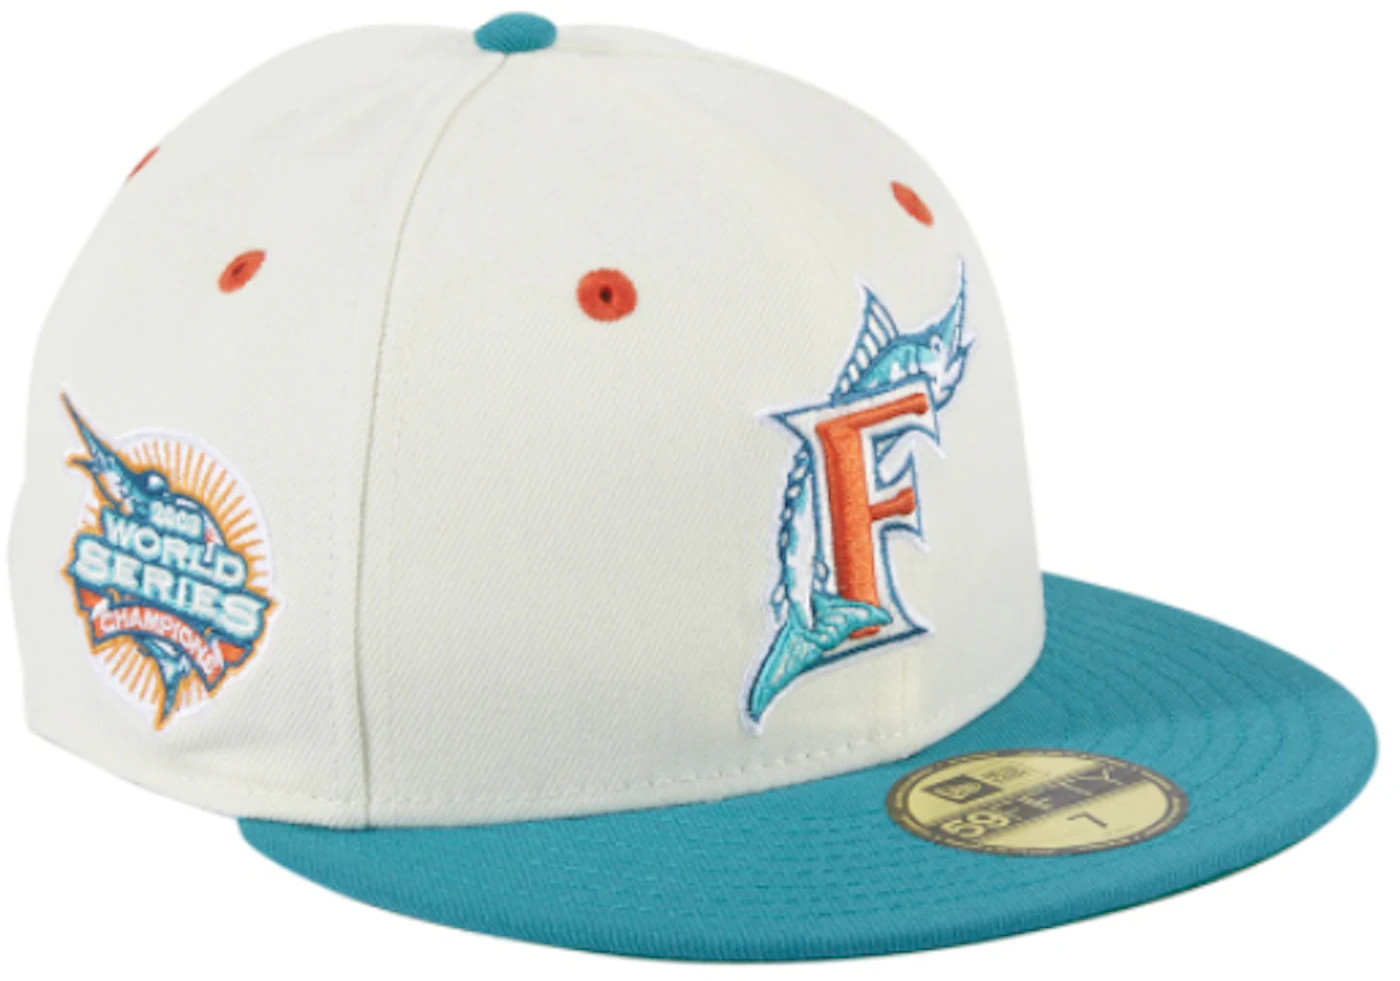 MIAMI MARLINS 1997 WS 25TH ANNIVERSARY MIPHA'S GRACE INSPIRED